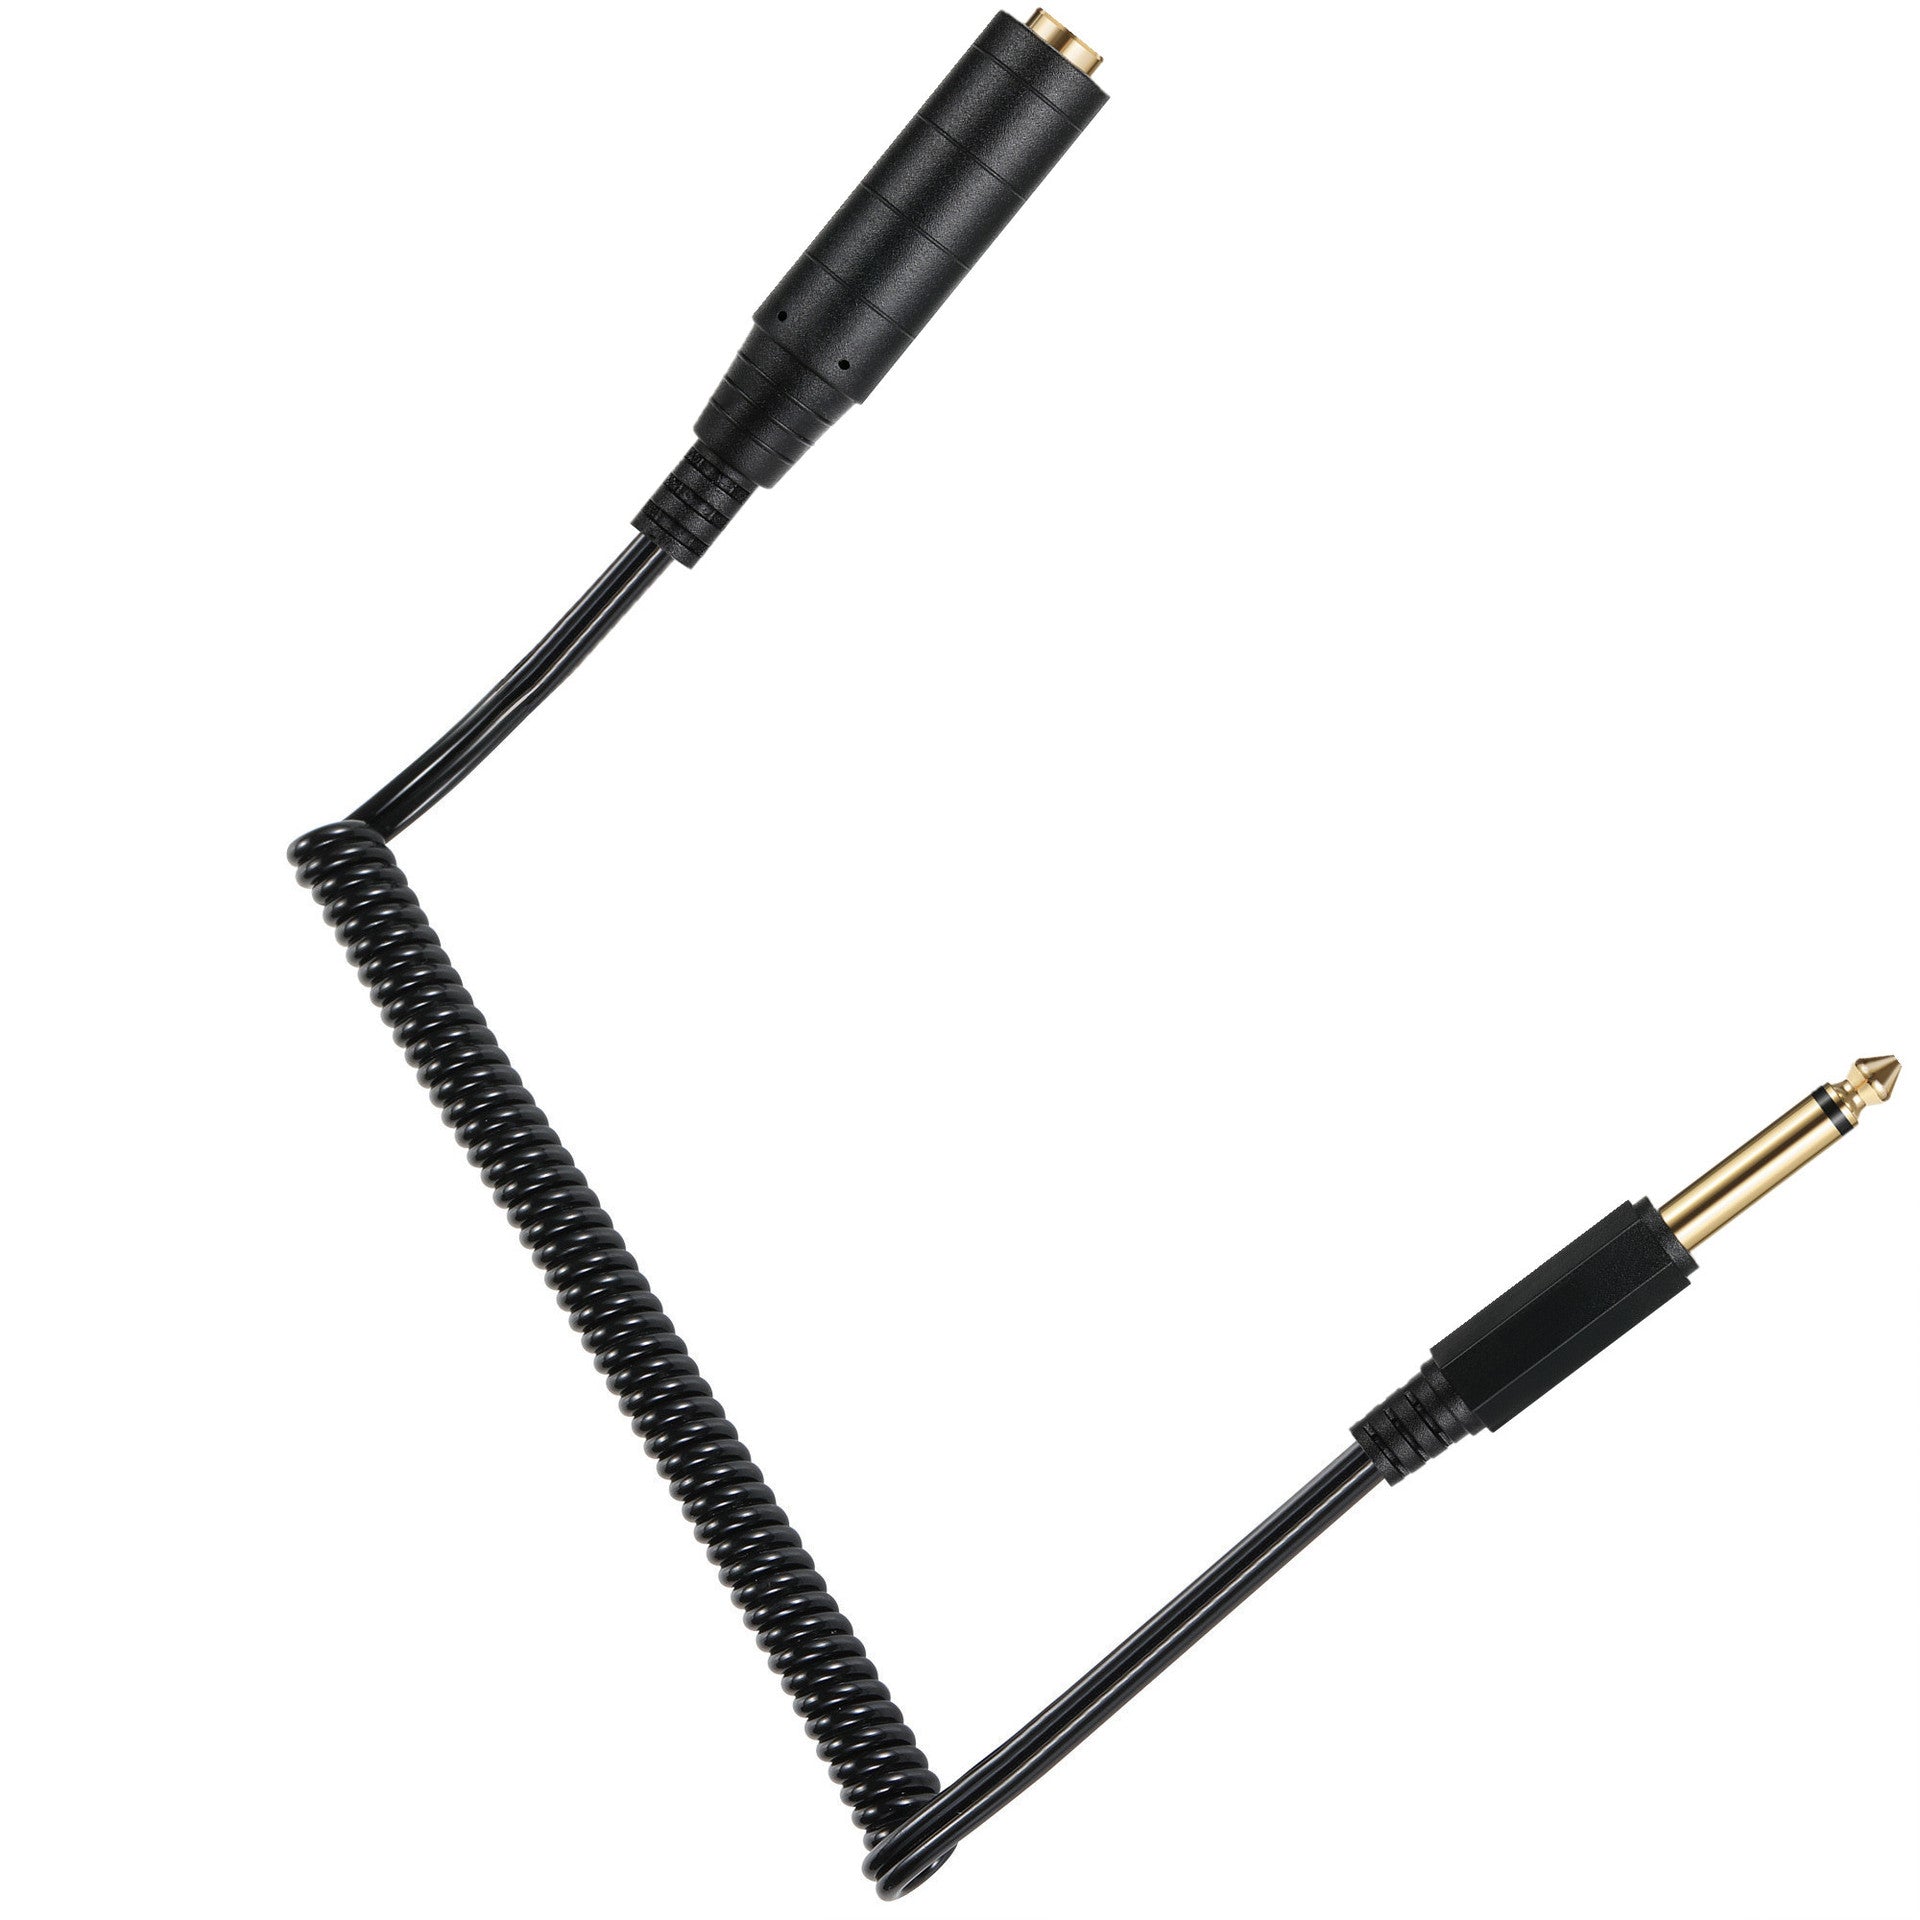 6.35mm 1/4 TS Mono Male to Female Guitar Extension Cable